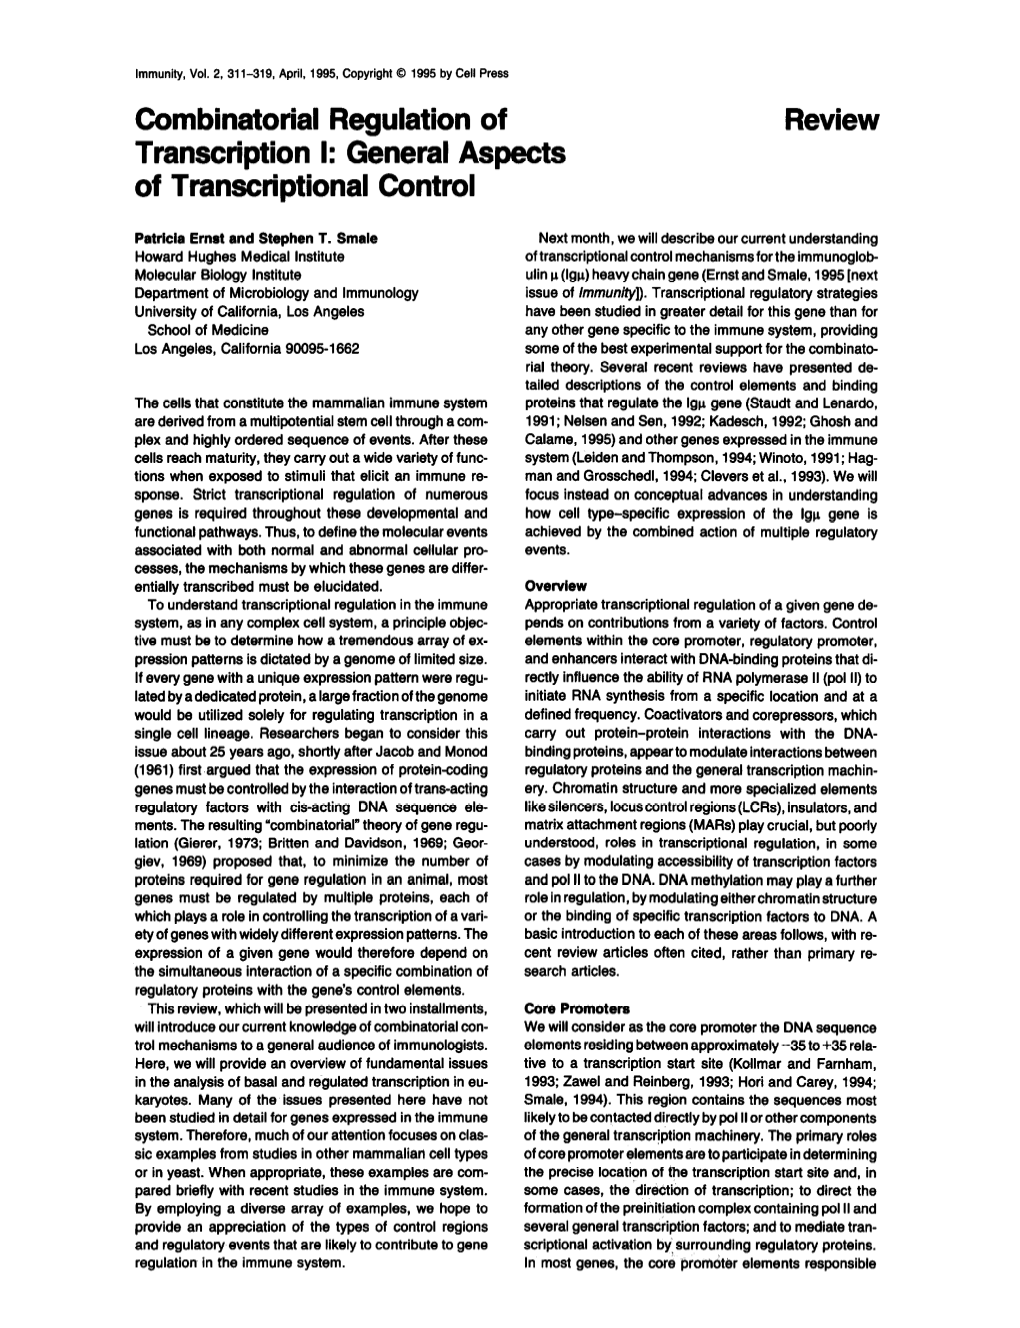 General Aspects of Transcriptional Control Review